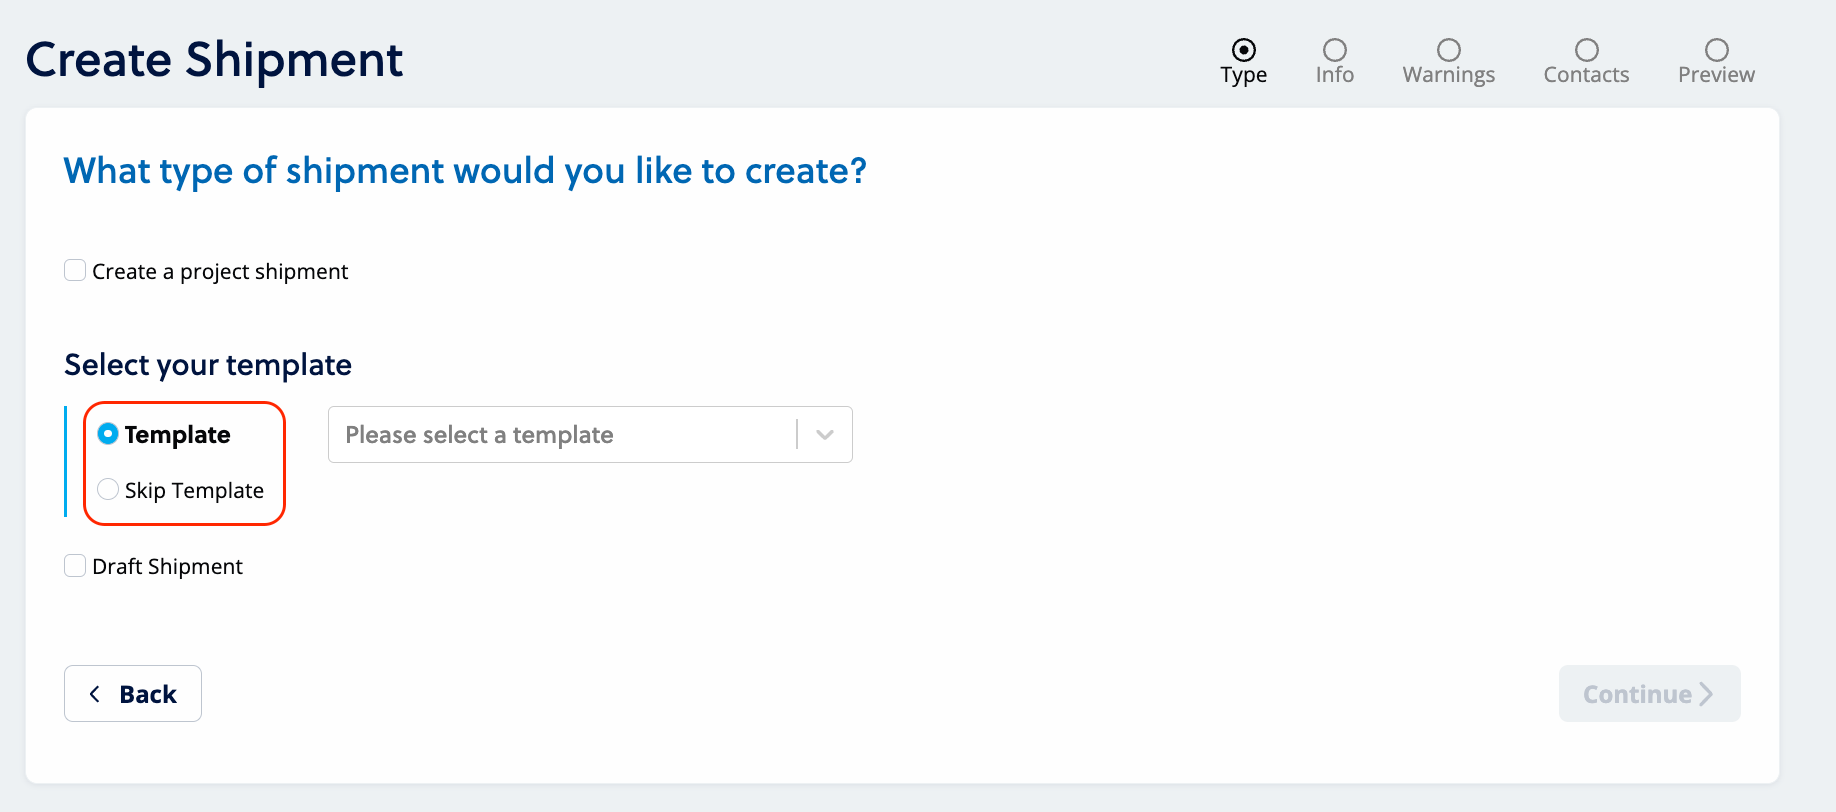 Create shipment flow: Select template